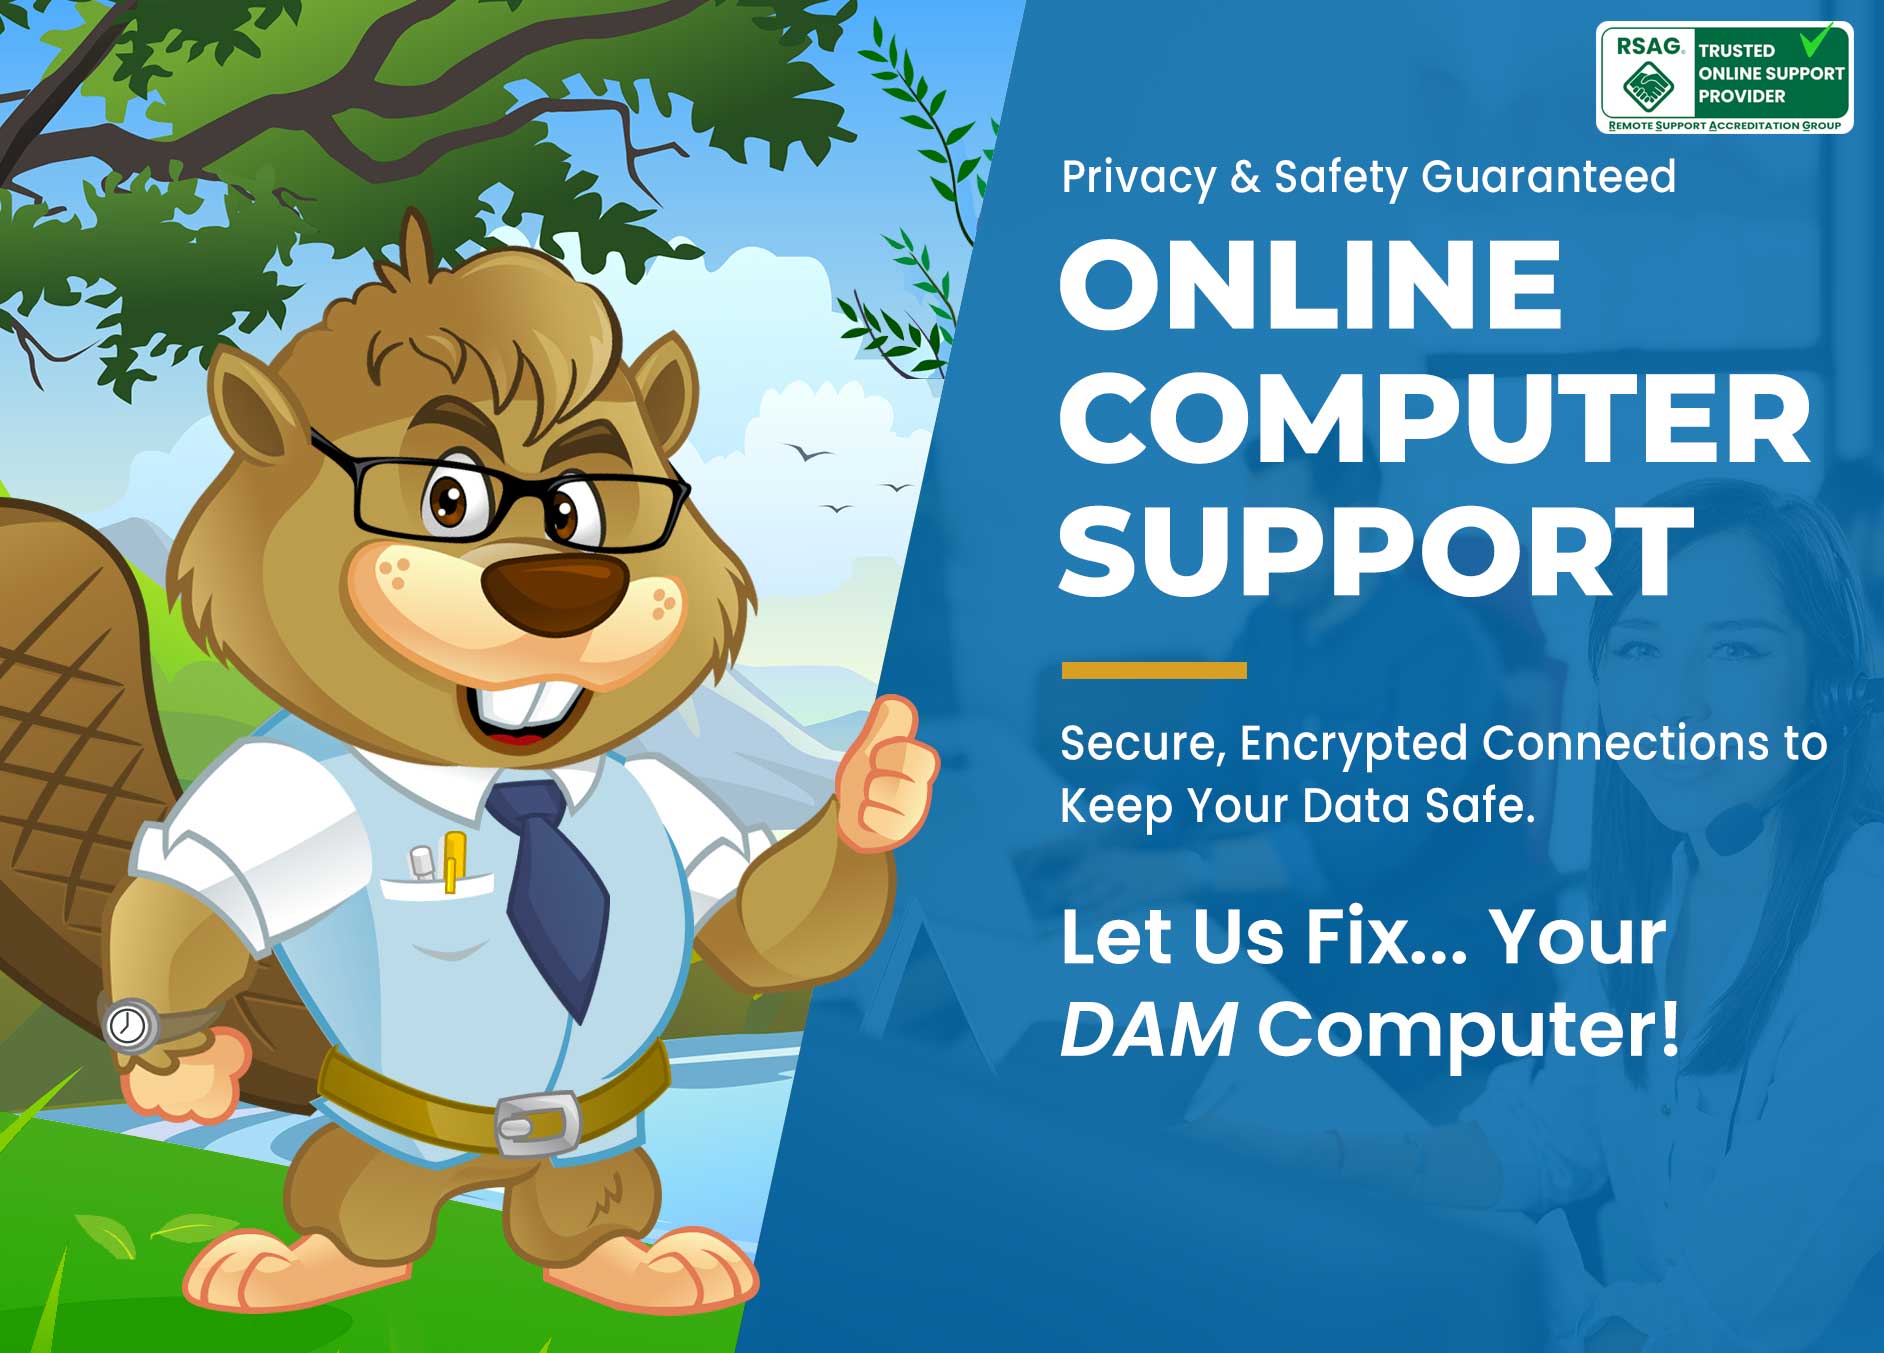 Brainy Beaver Online Computer Support mascot giving thumbs up in front of scenic landscape. Banner offers secure, encrypted online tech support with privacy and safety guaranteed.